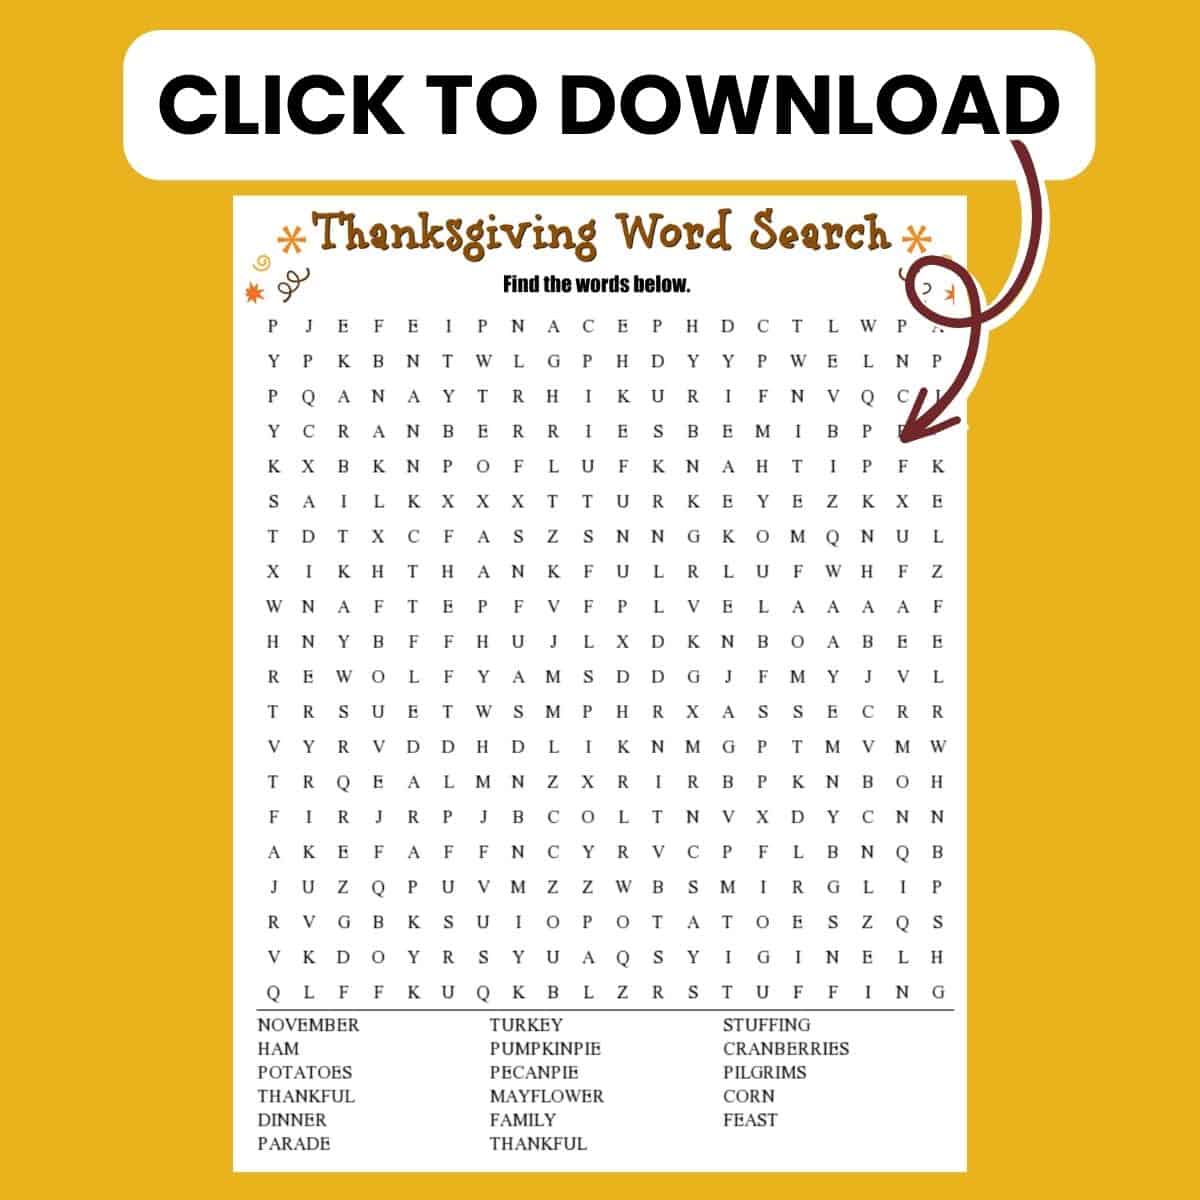 Click here to access the Thanksgiving Word Search PDF.